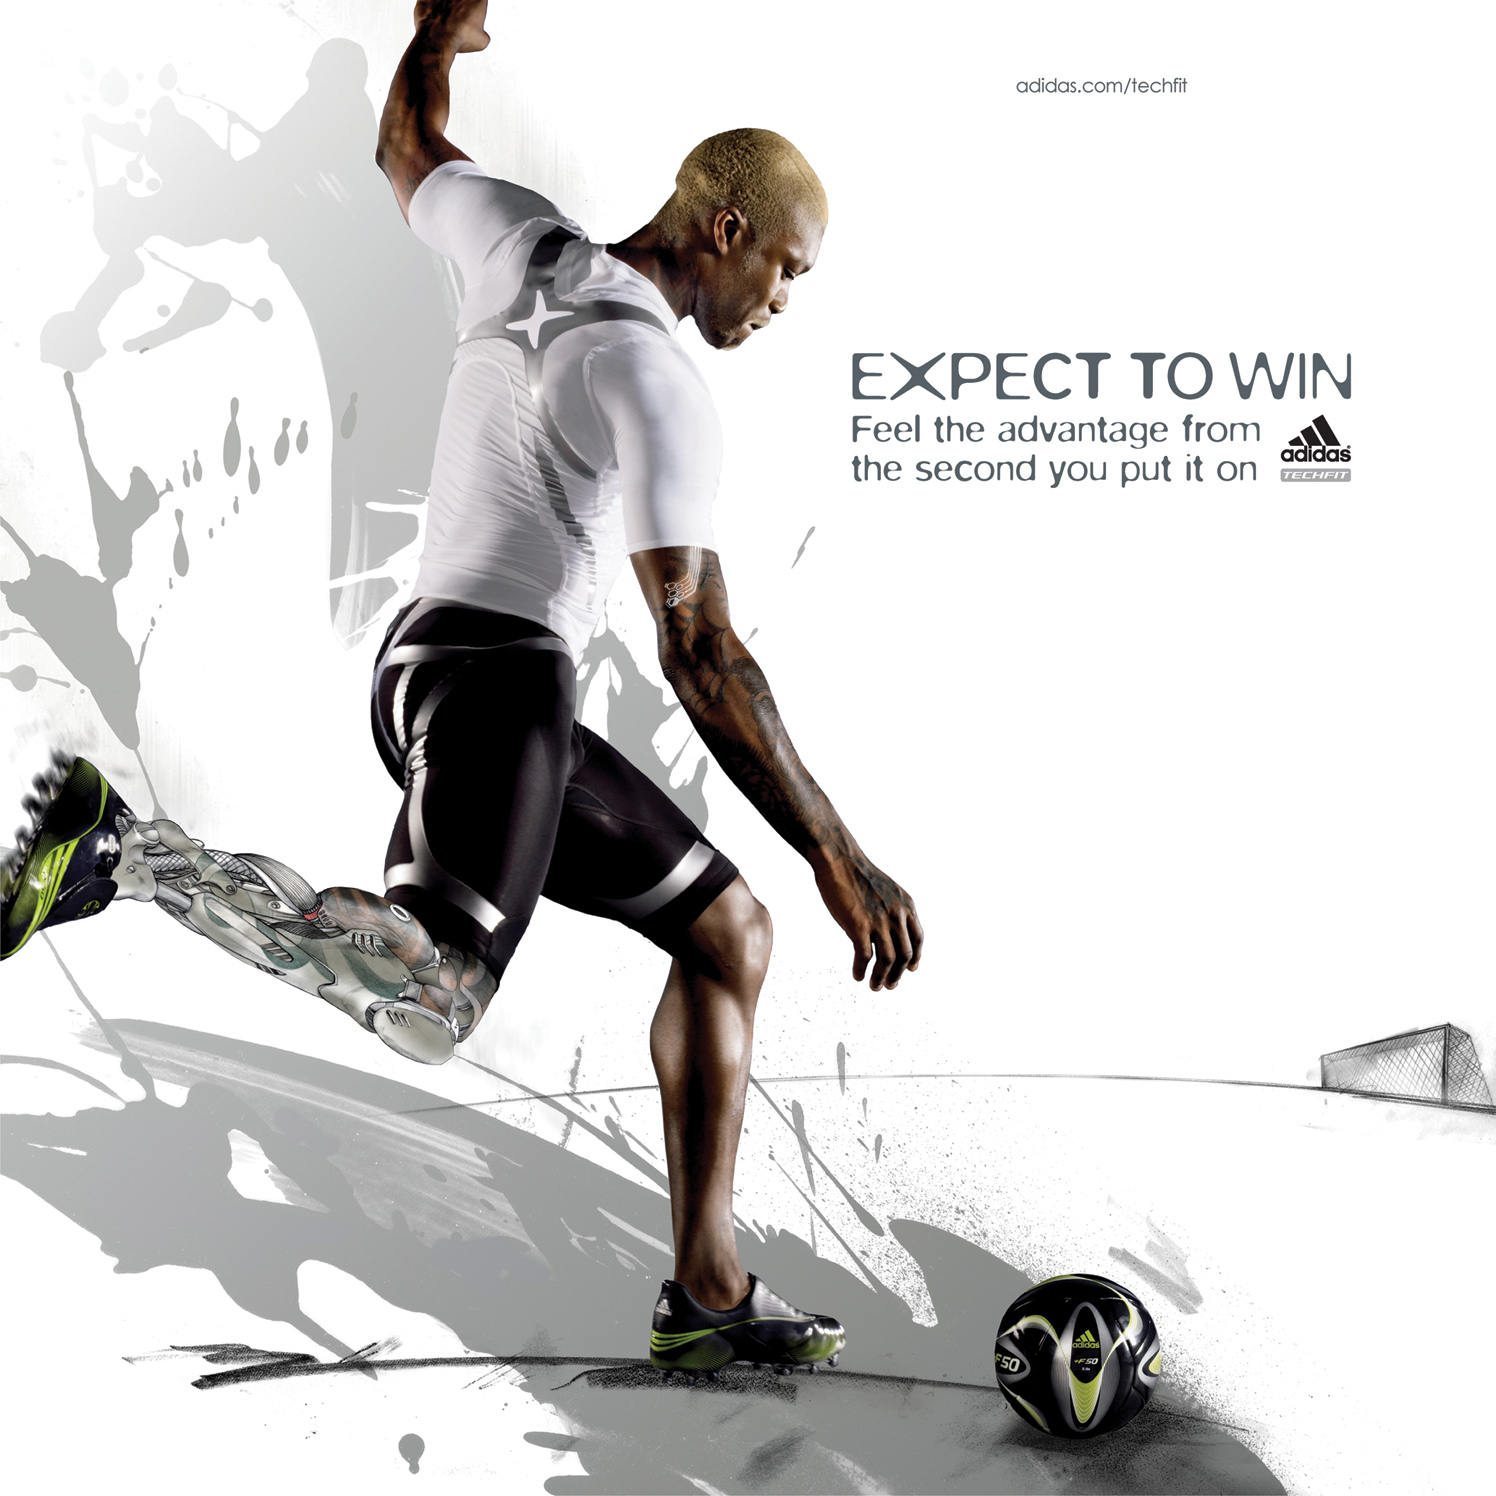 Adidas Believe Expect To Win